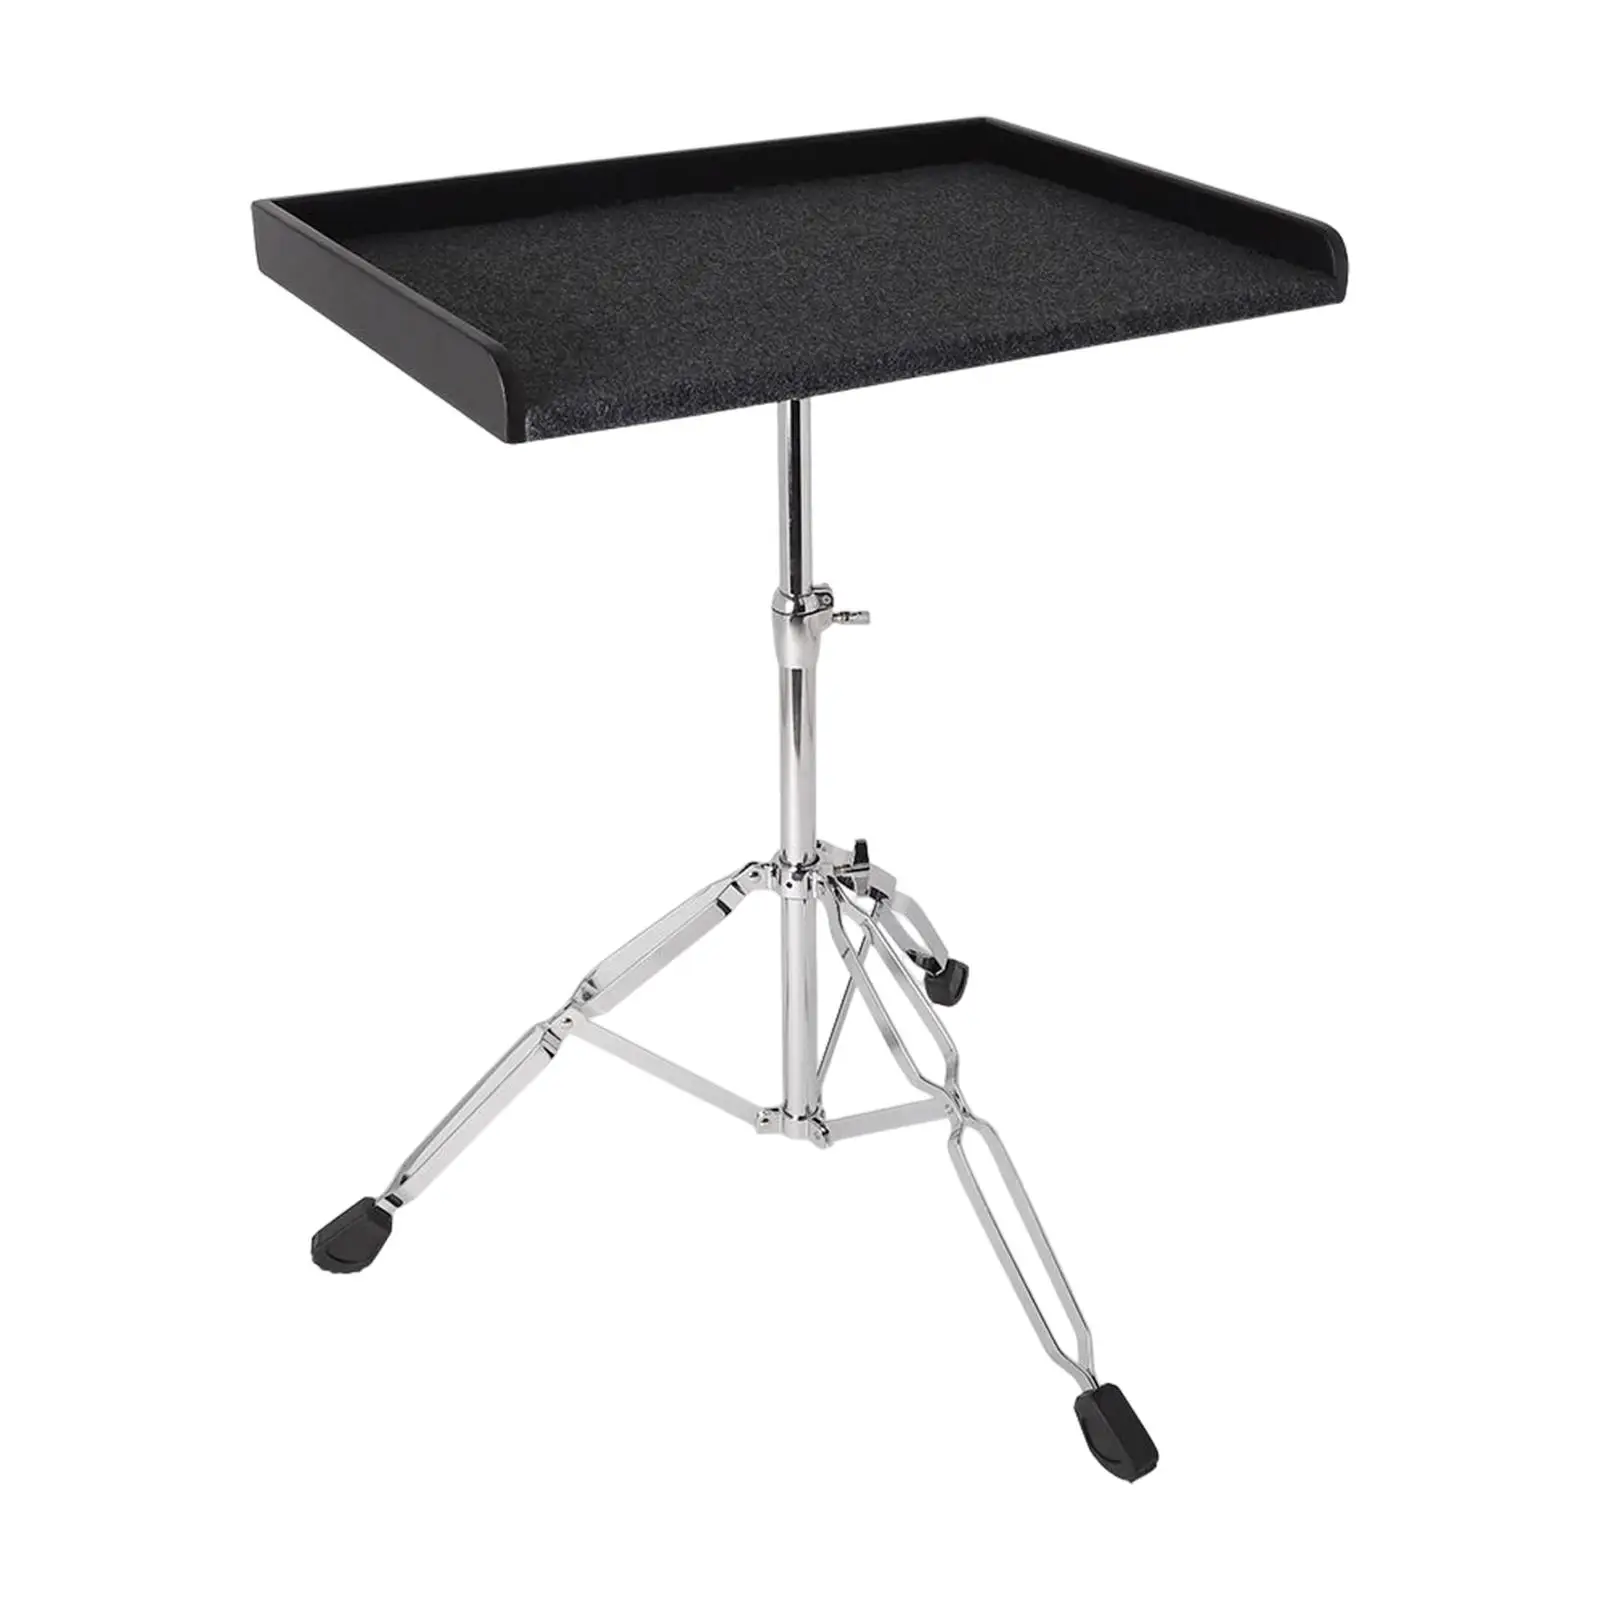 Professional Percussion Table Mount Holder Adjustable Thick EVA Padded DJ Laptop Anti Slip for Studio Easy to Carry Travel